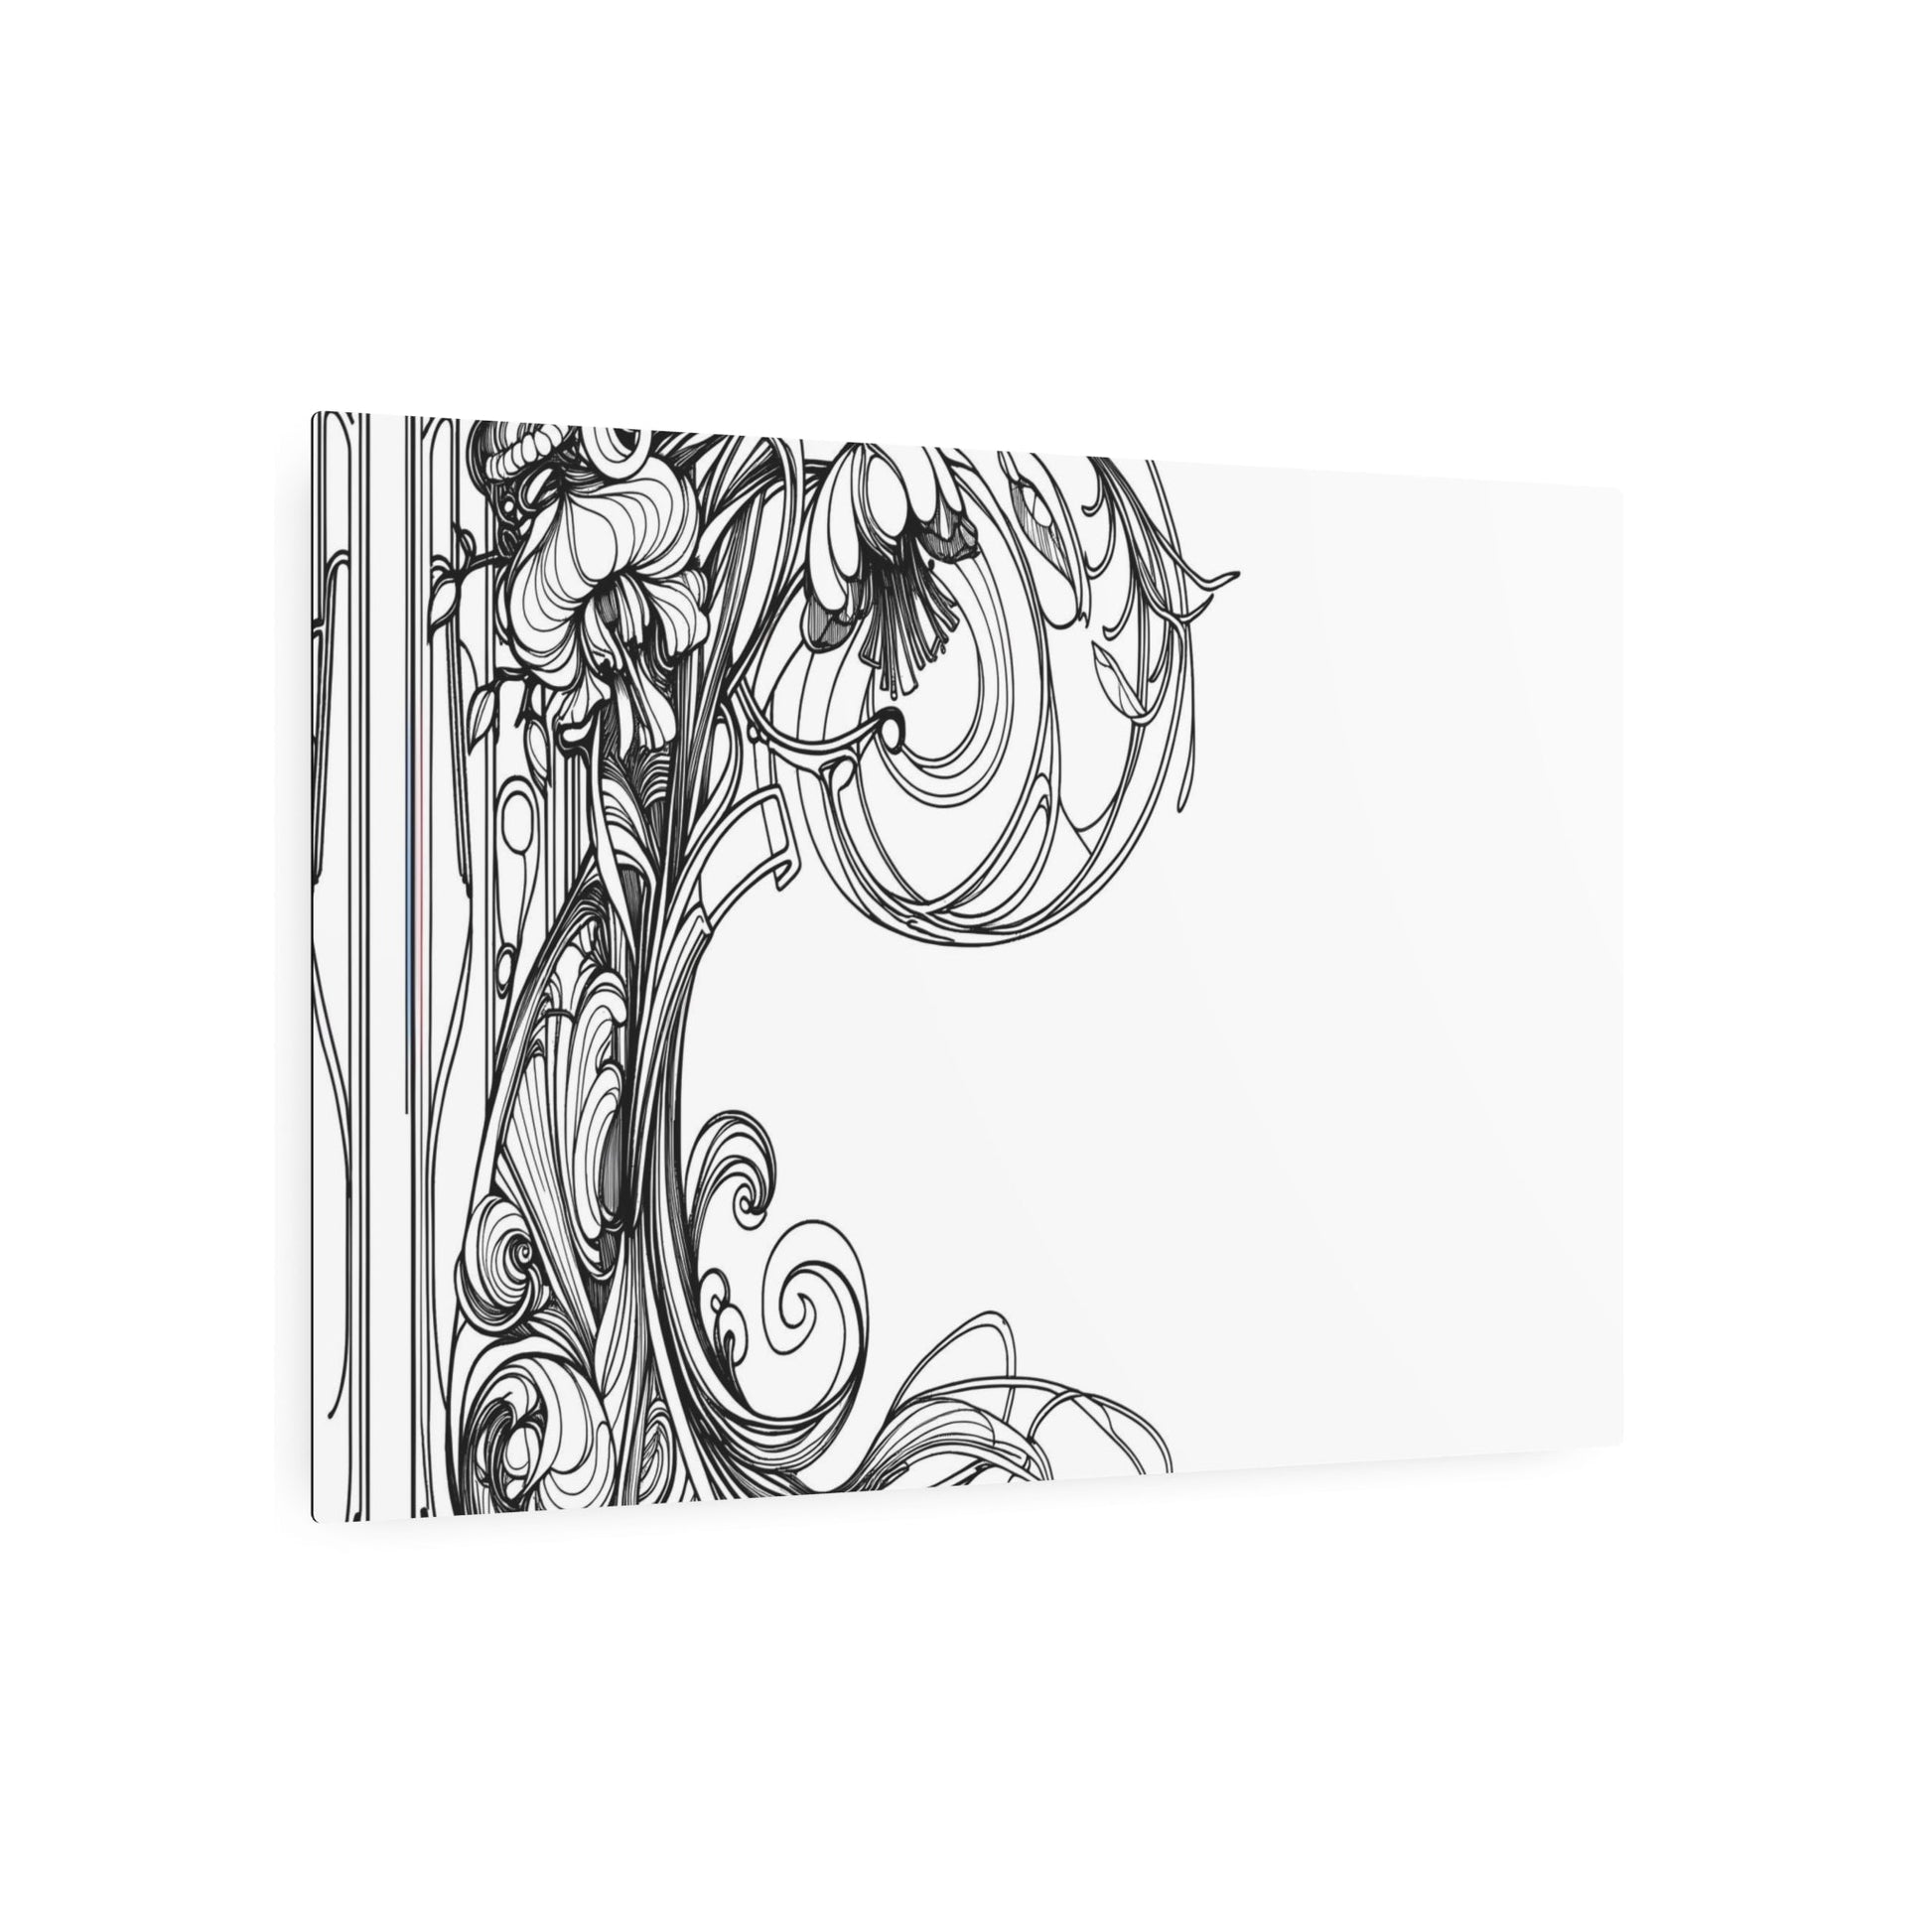 Metal Poster Art | "Art Nouveau Inspired Illustration with Natural Forms & Flowing Lines - Western Art Styles Collection" - Metal Poster Art 36″ x 24″ (Horizontal) 0.12''